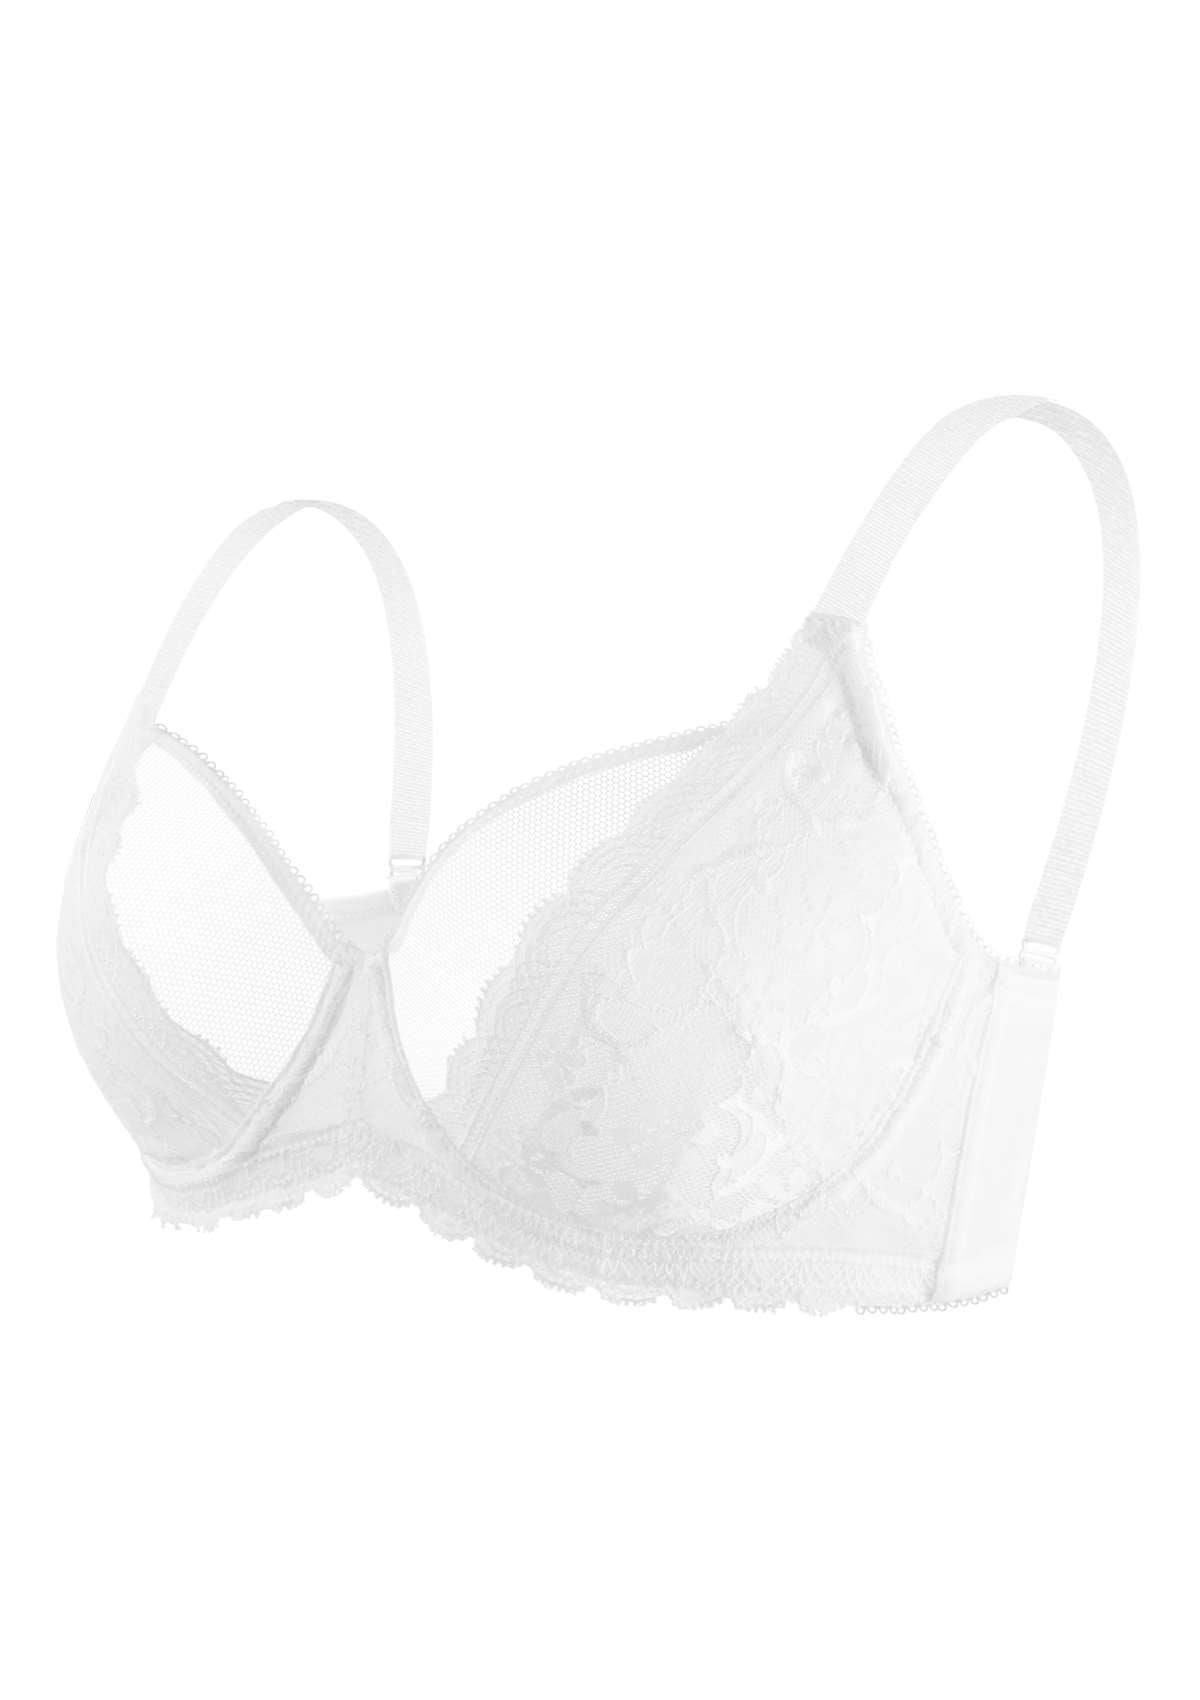 HSIA Anemone Big Bra: Best Bra For Lift And Support, Floral Bra - Black / 36 / DD/E